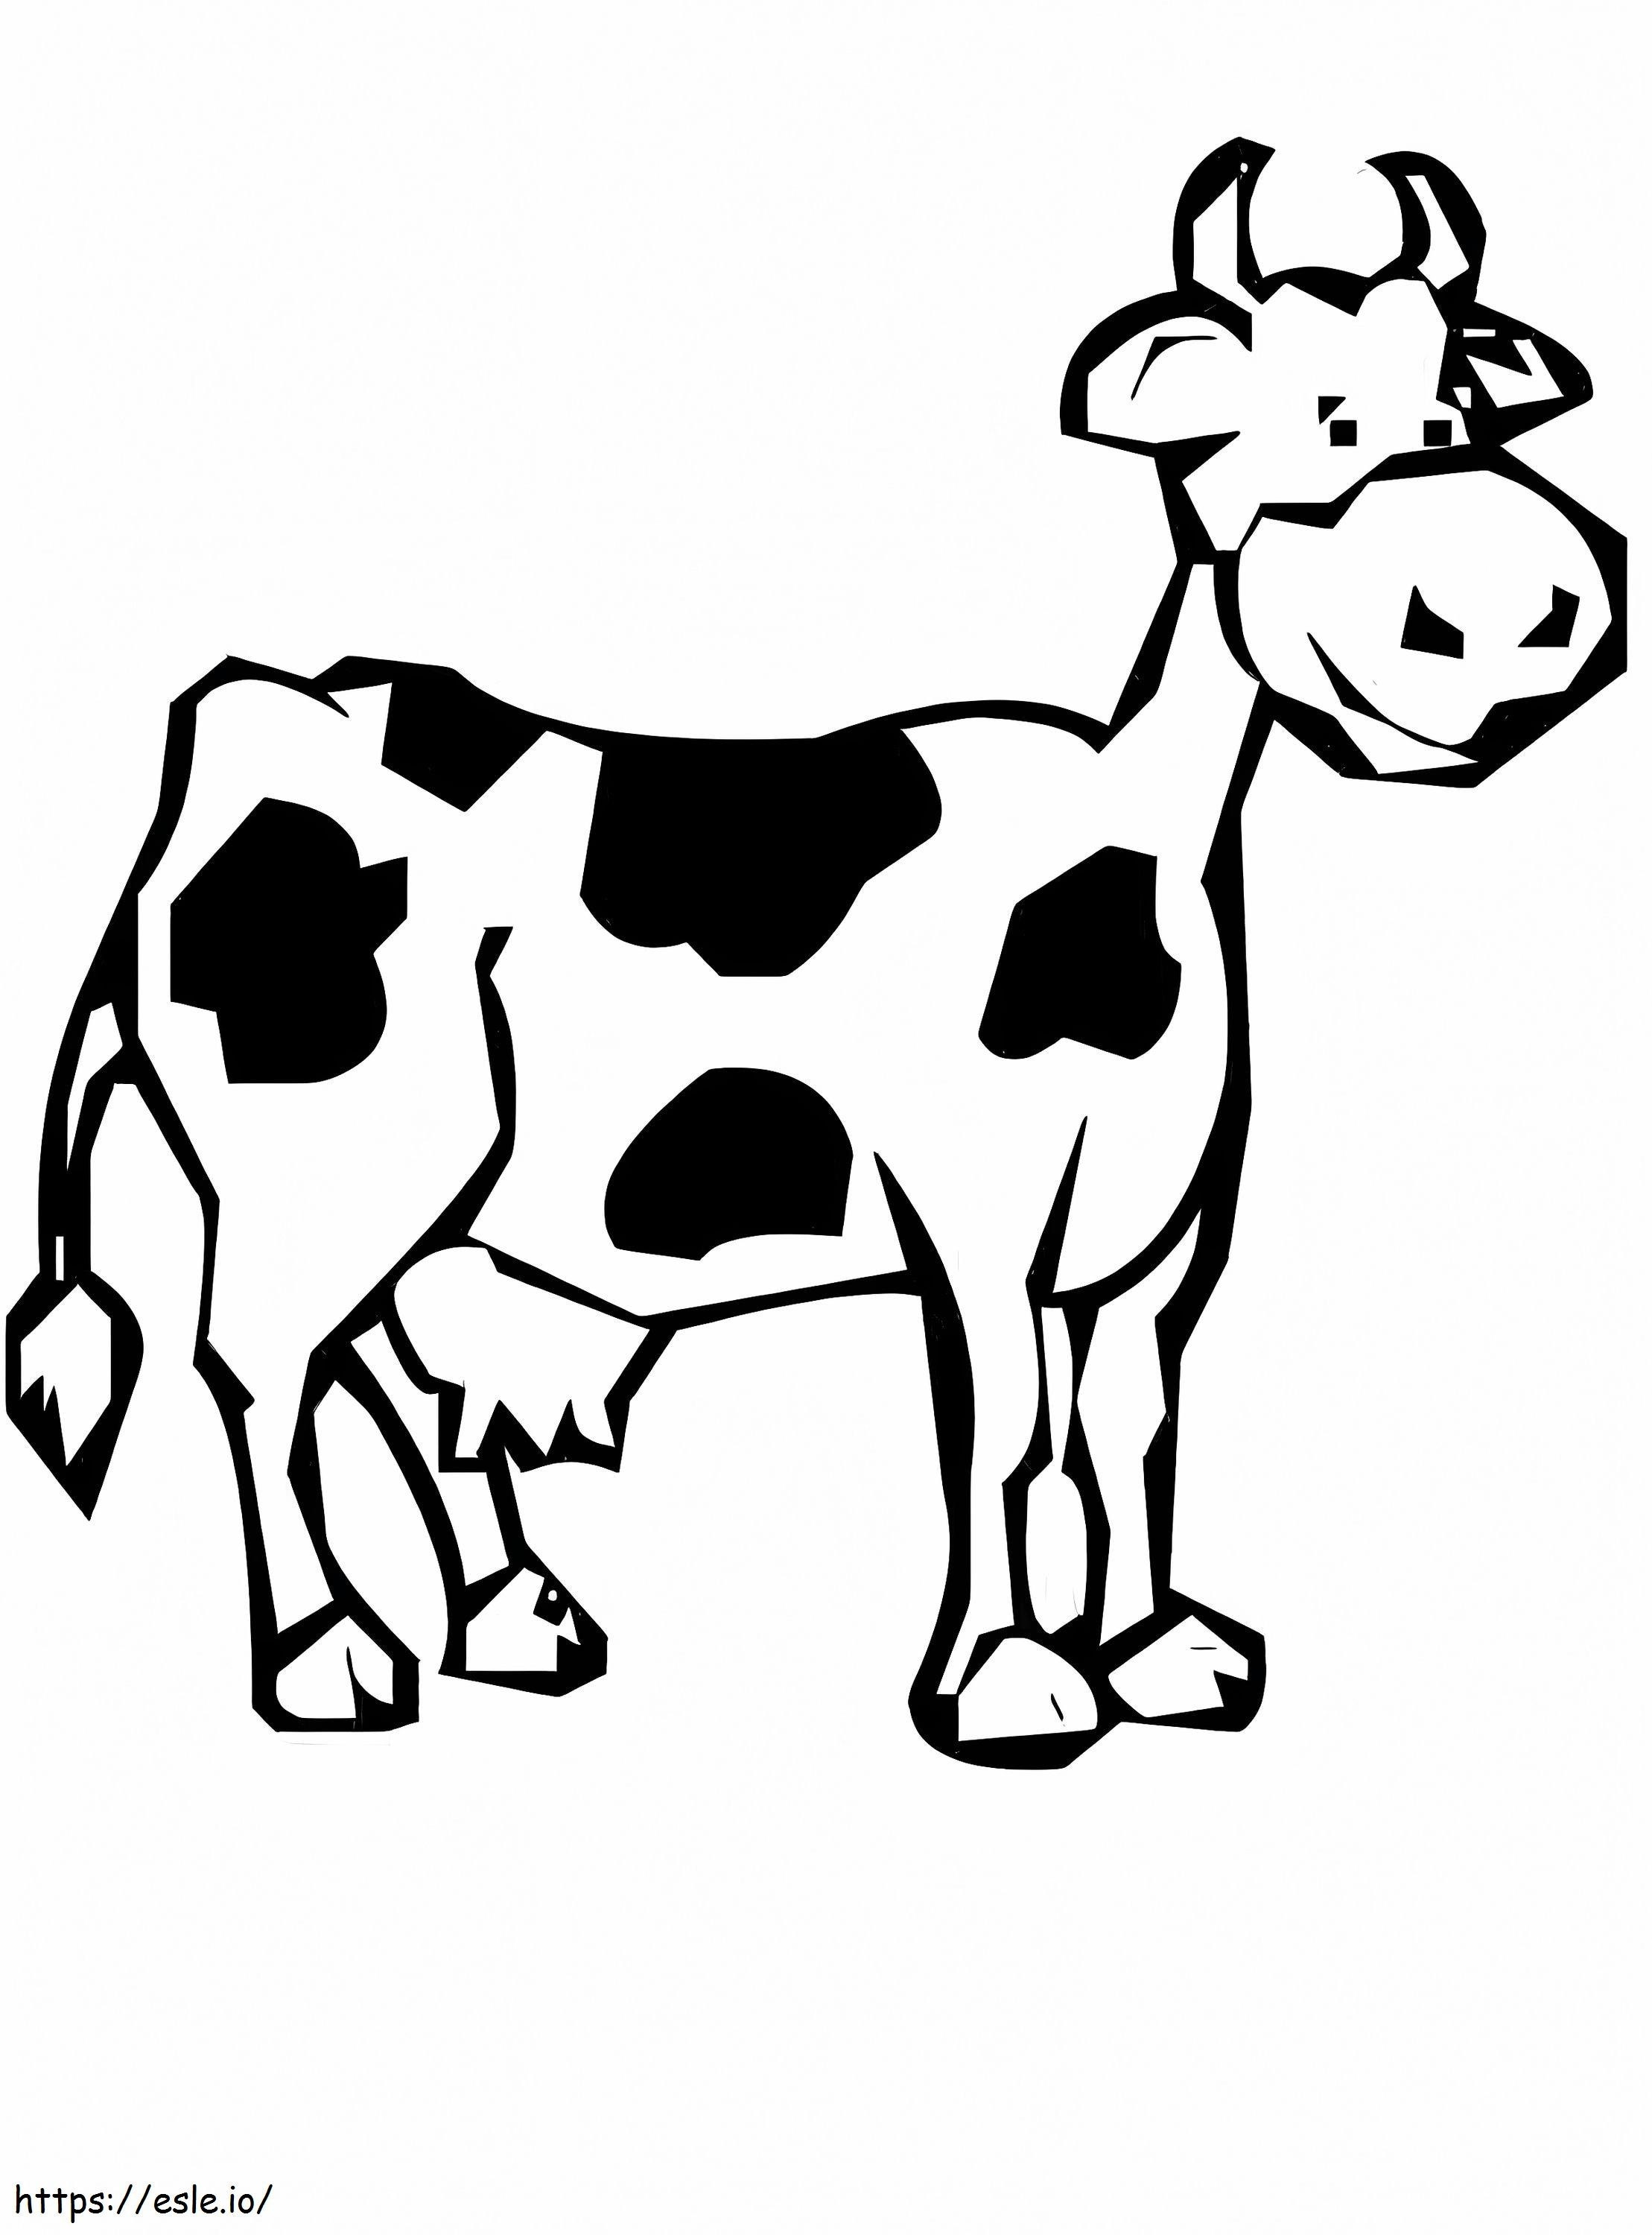 Cow 14 coloring page